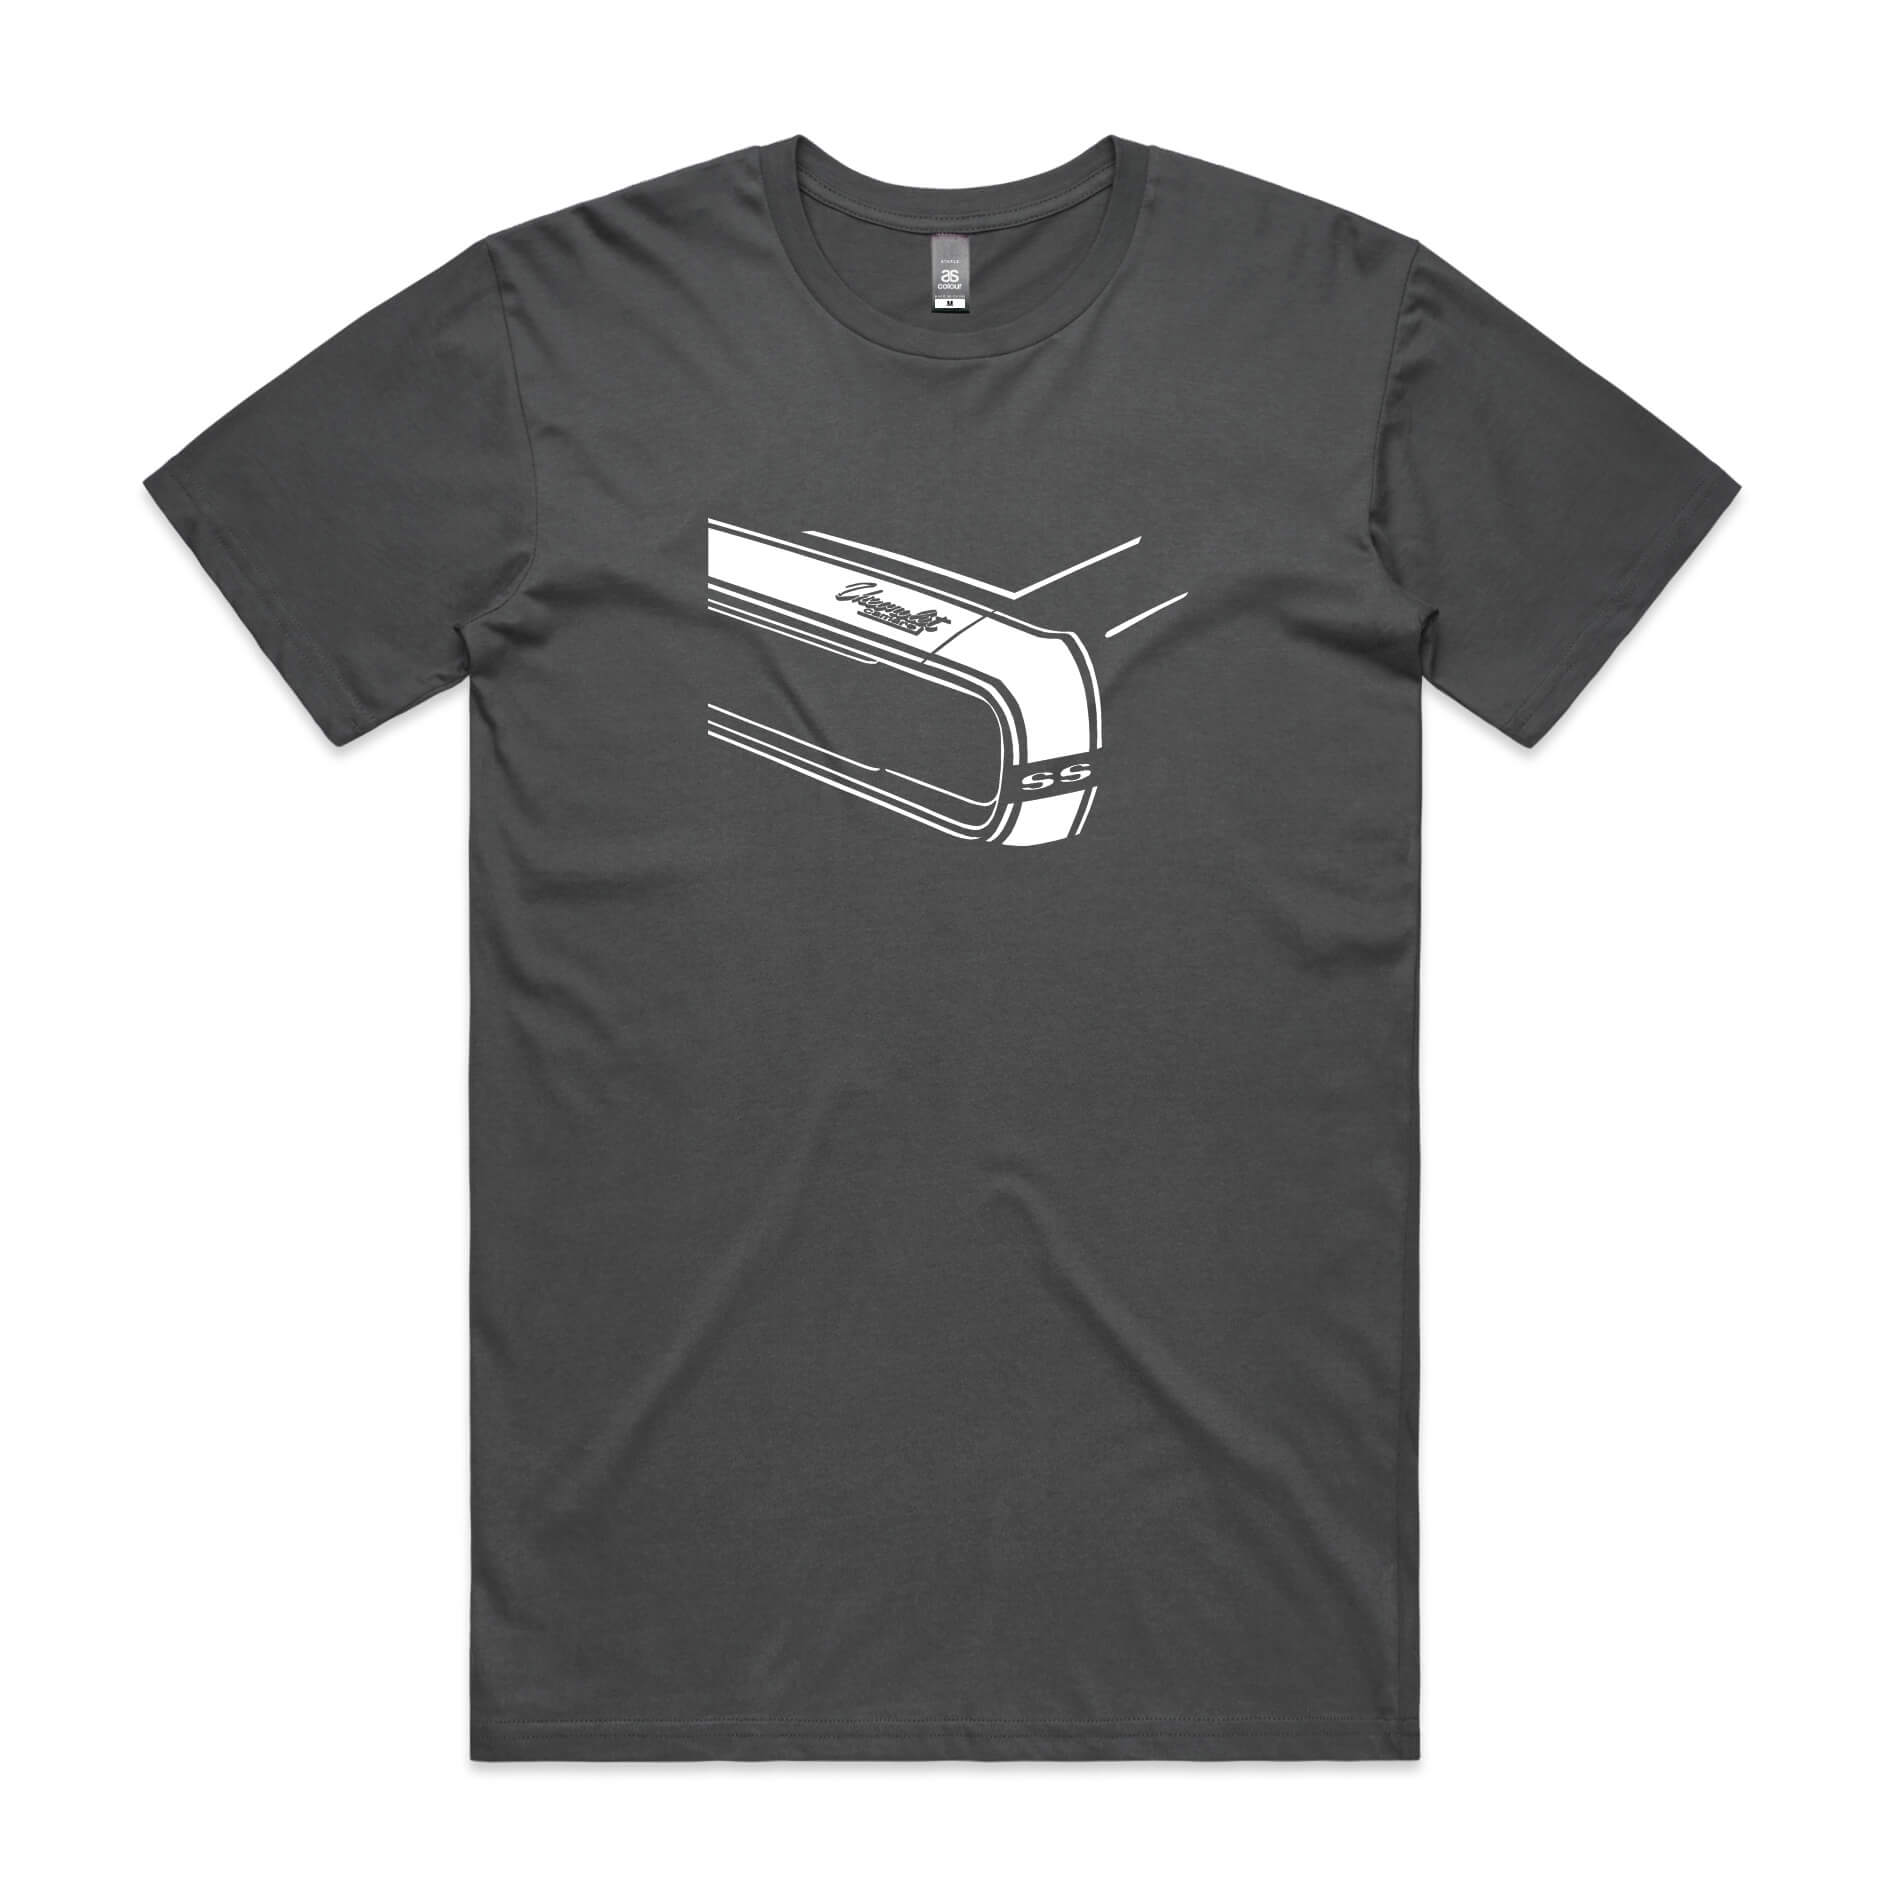 Chevrolet Camaro SS t-shirt in charcoal grey